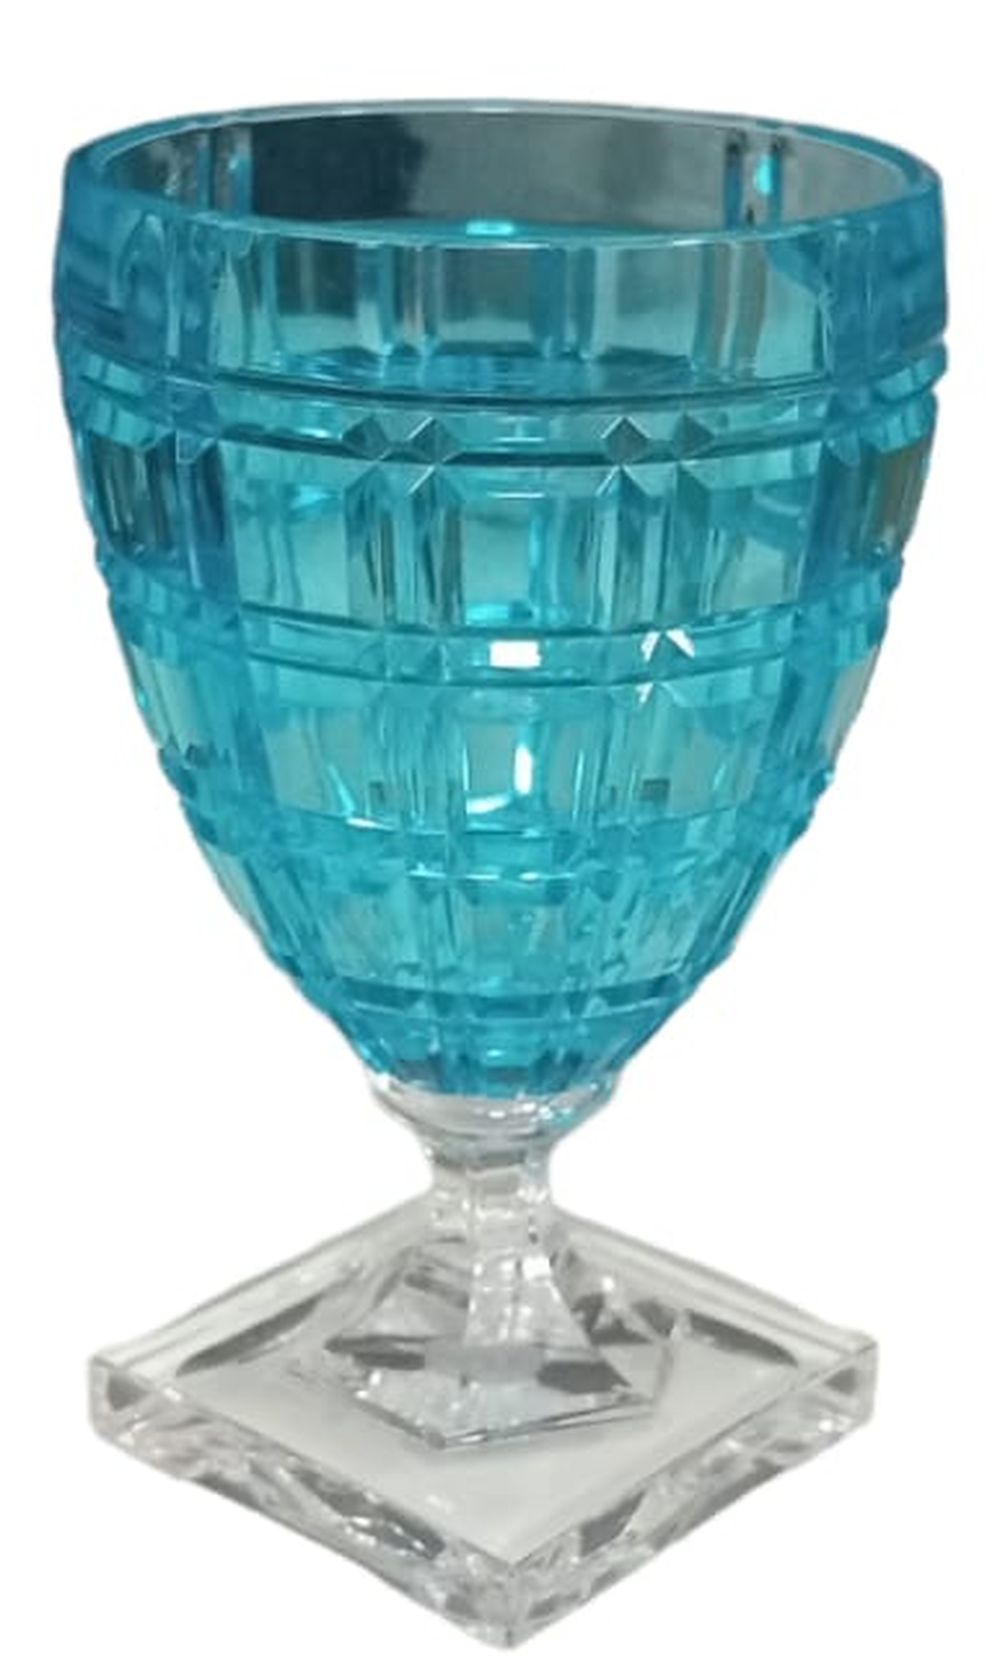 Set of 6 wine glasses Winston model from the Mario Luca Giusti collection Color: TURQUOISE